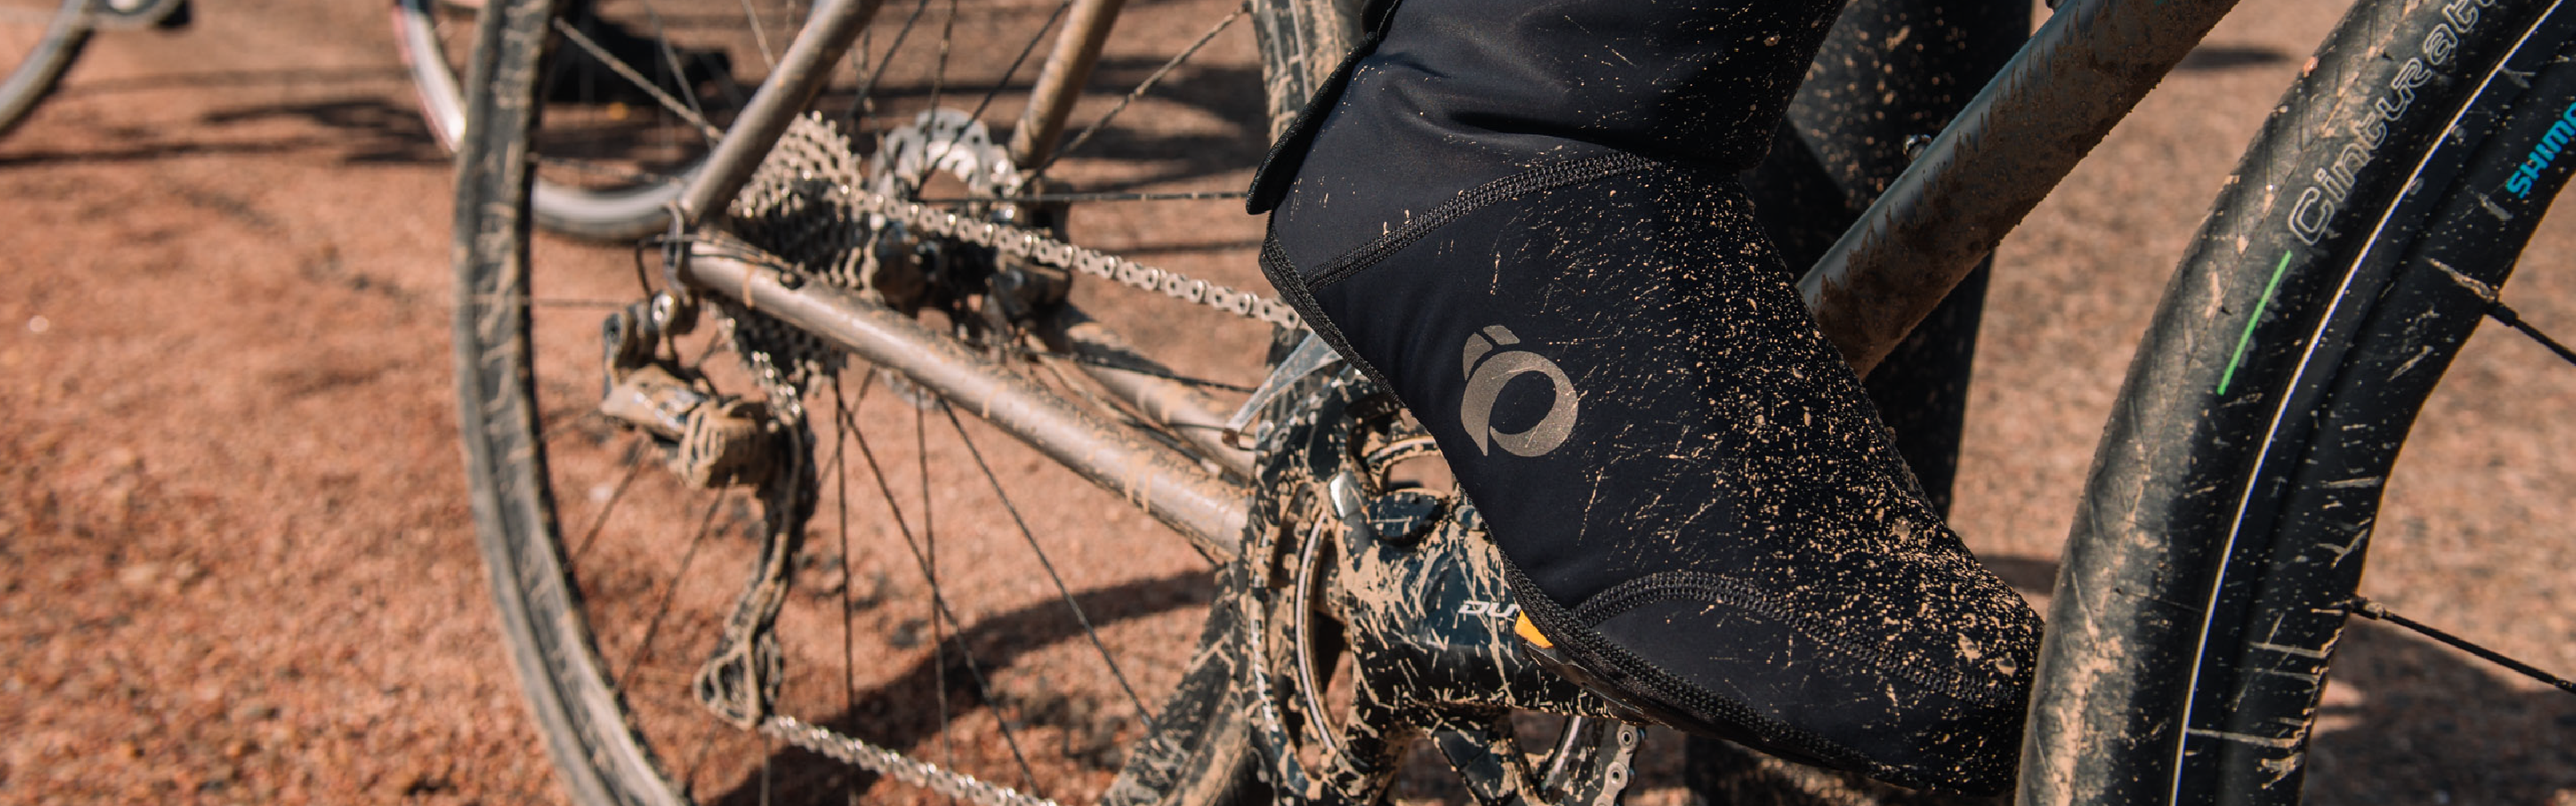 Rider Wearing Cycling Shoe Covers on Muddy Terrain